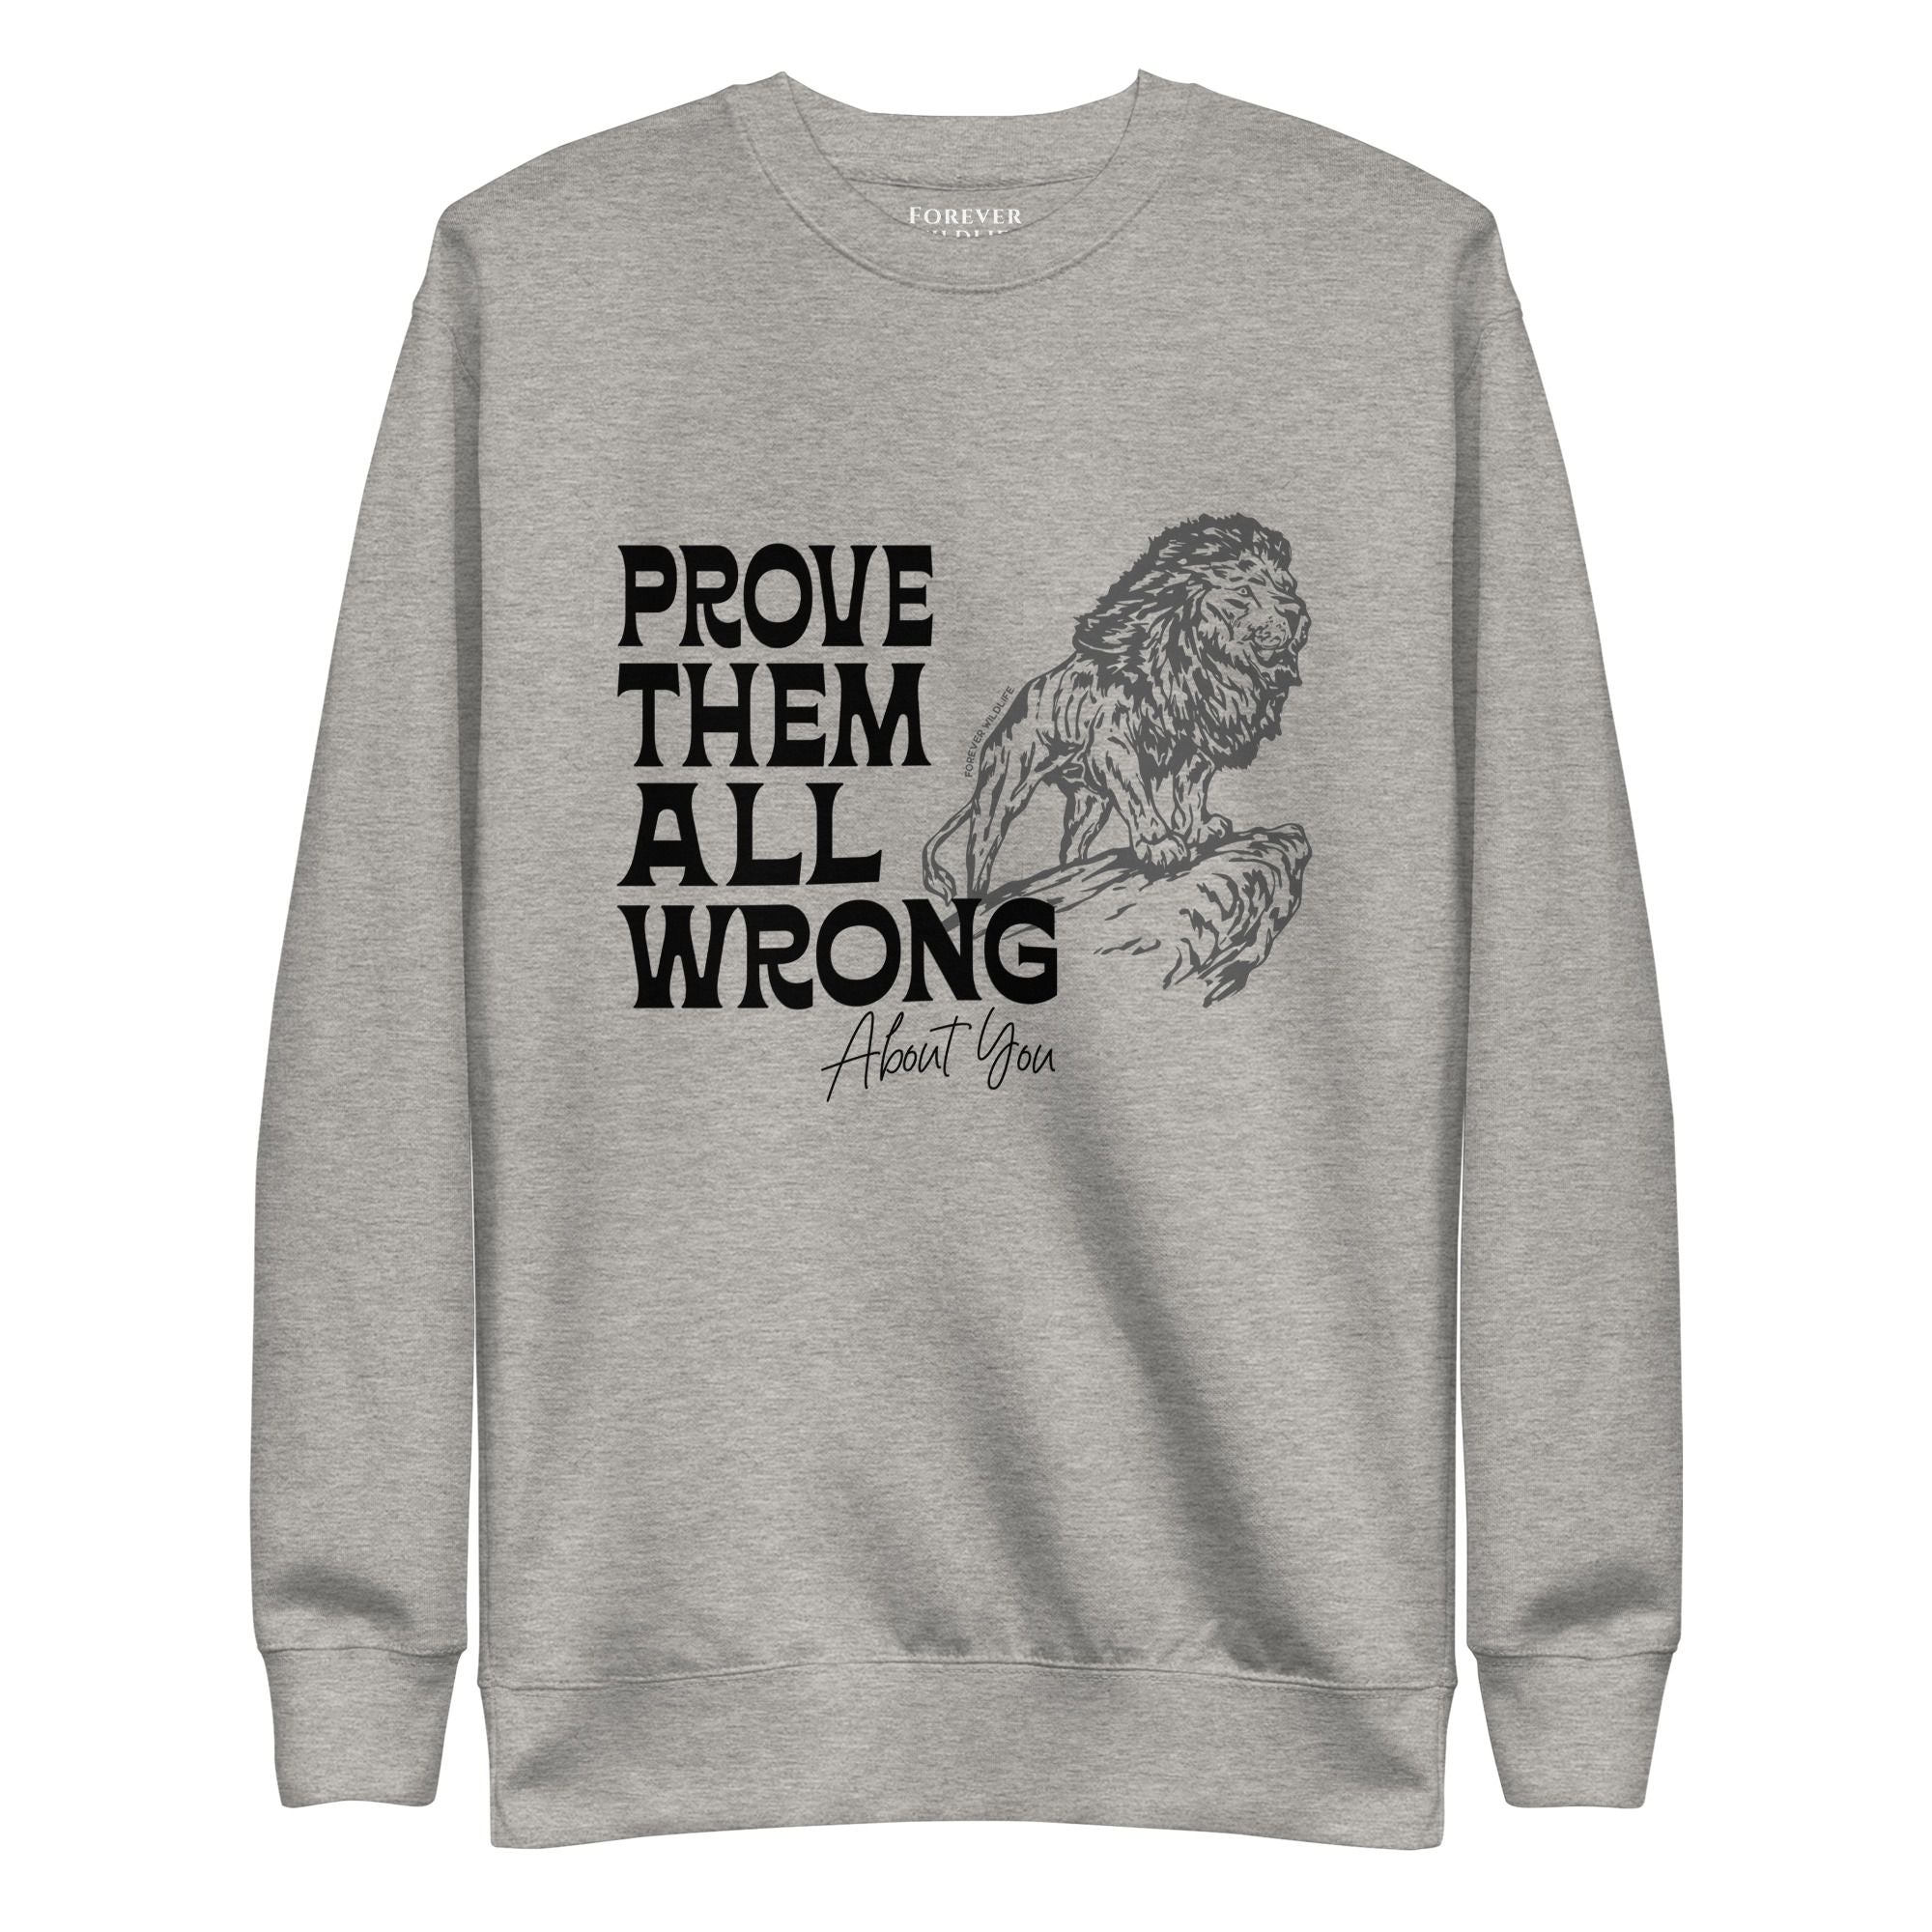 Lion Sweatshirt in Grey-Premium Wildlife Animal Inspiration Sweatshirt Design with 'Prove Them All Wrong About You' text, part of Wildlife Sweatshirts & Clothing from Forever Wildlife.